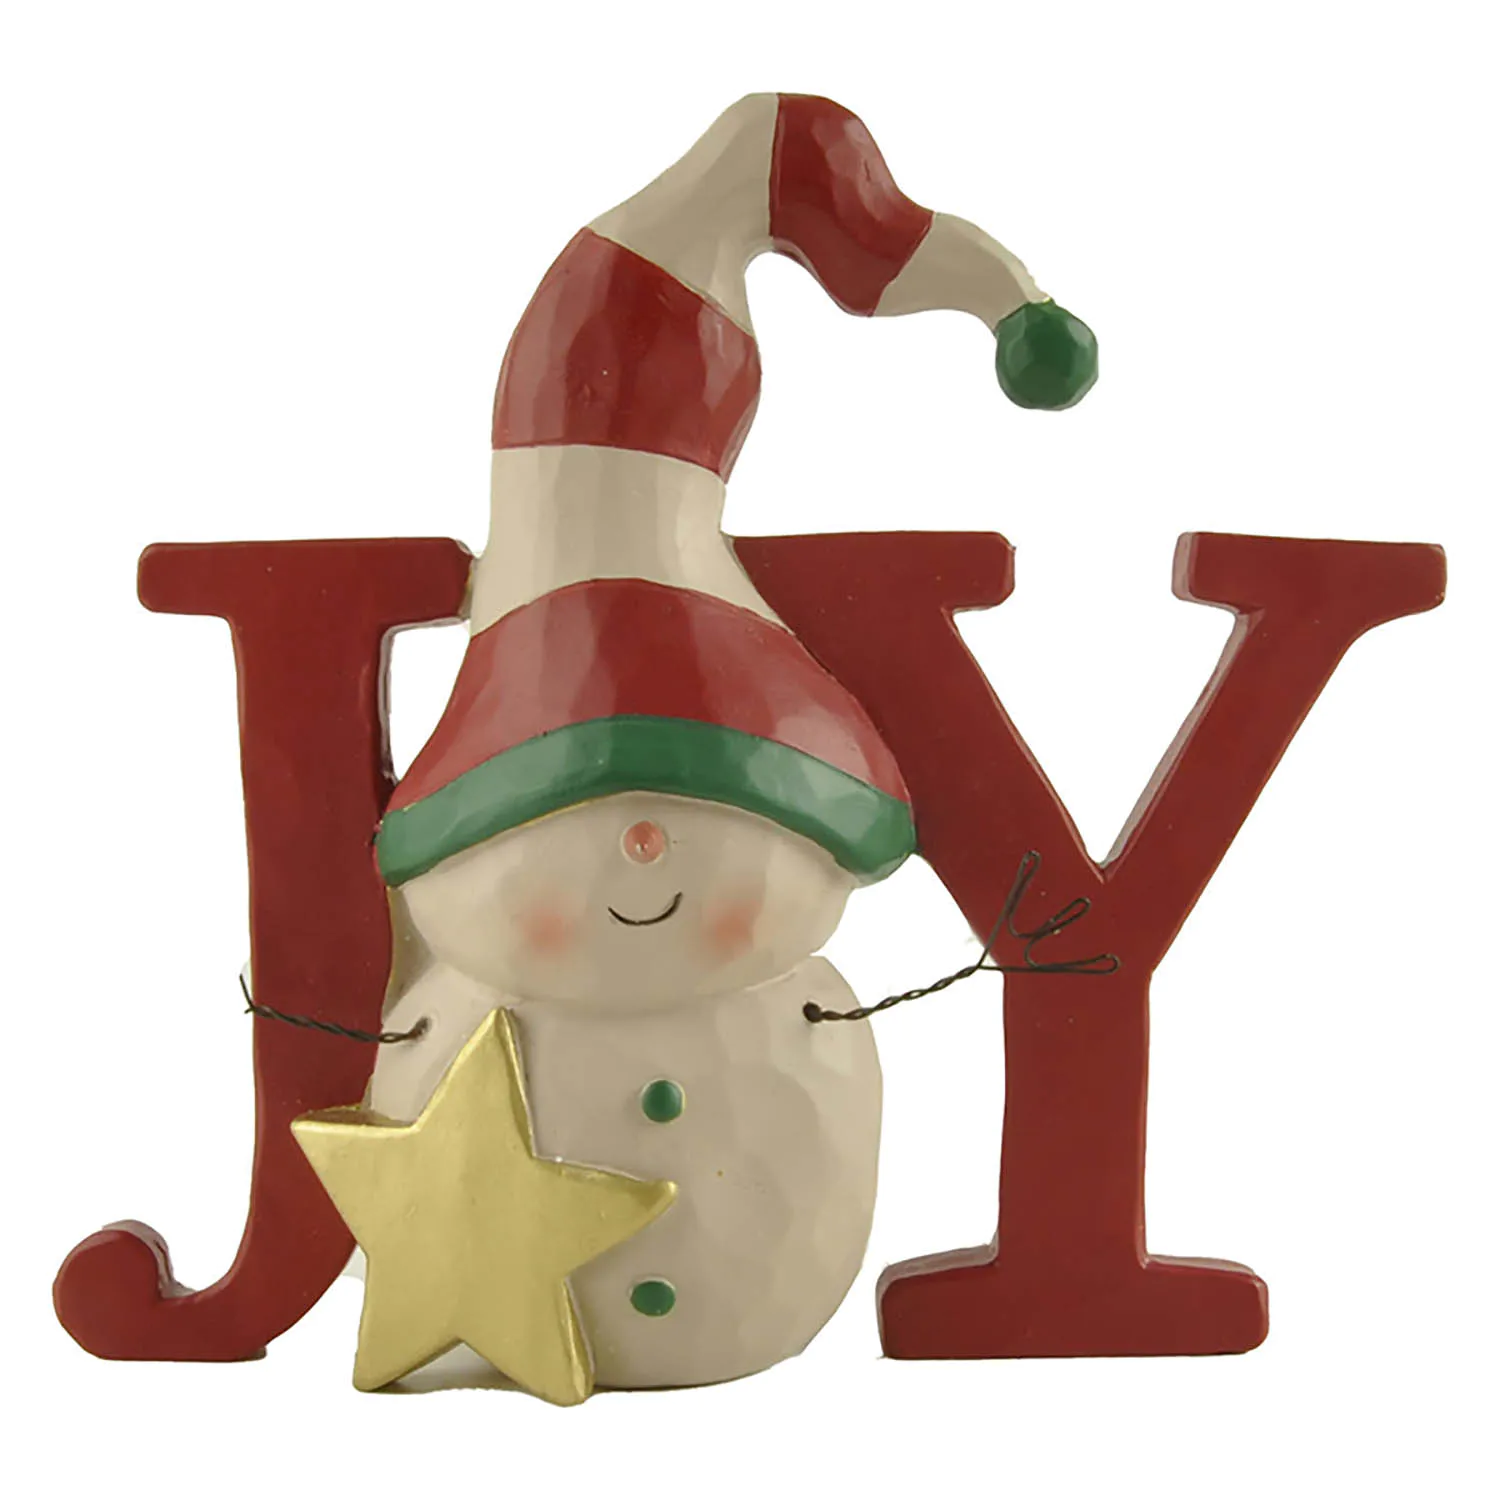 Wholesale Cute Resin Figurine 4.49 Inch Snowman Statues with JOY Plaque for Christmas Gift Home Decor 218-13105